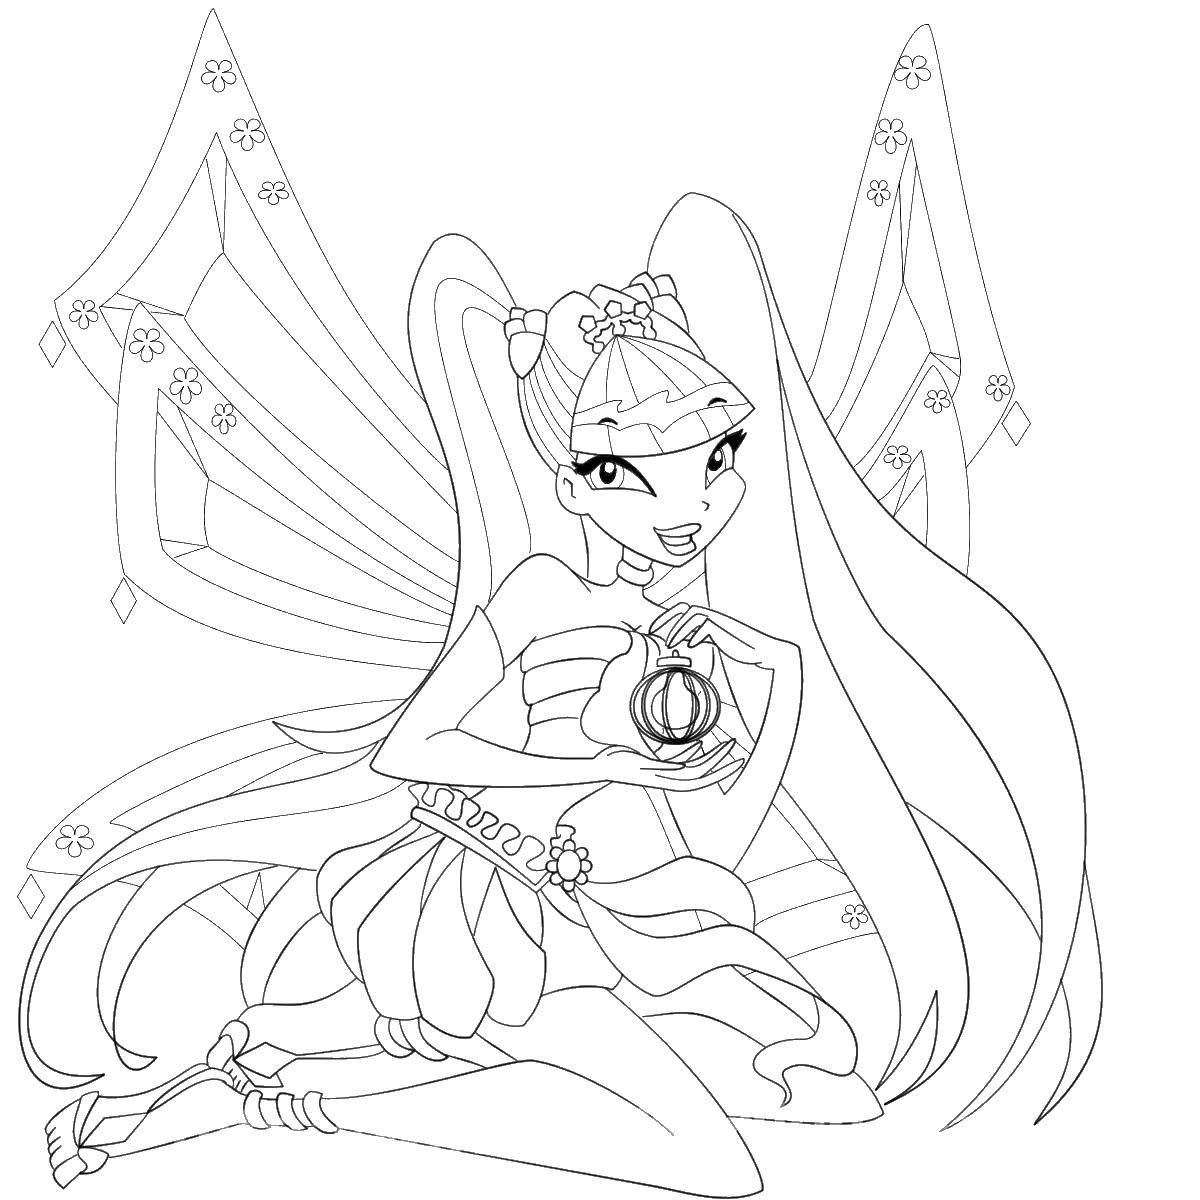 Coloring Fairy of the sun Stella. Category Winx. Tags:  Character cartoon, Winx.